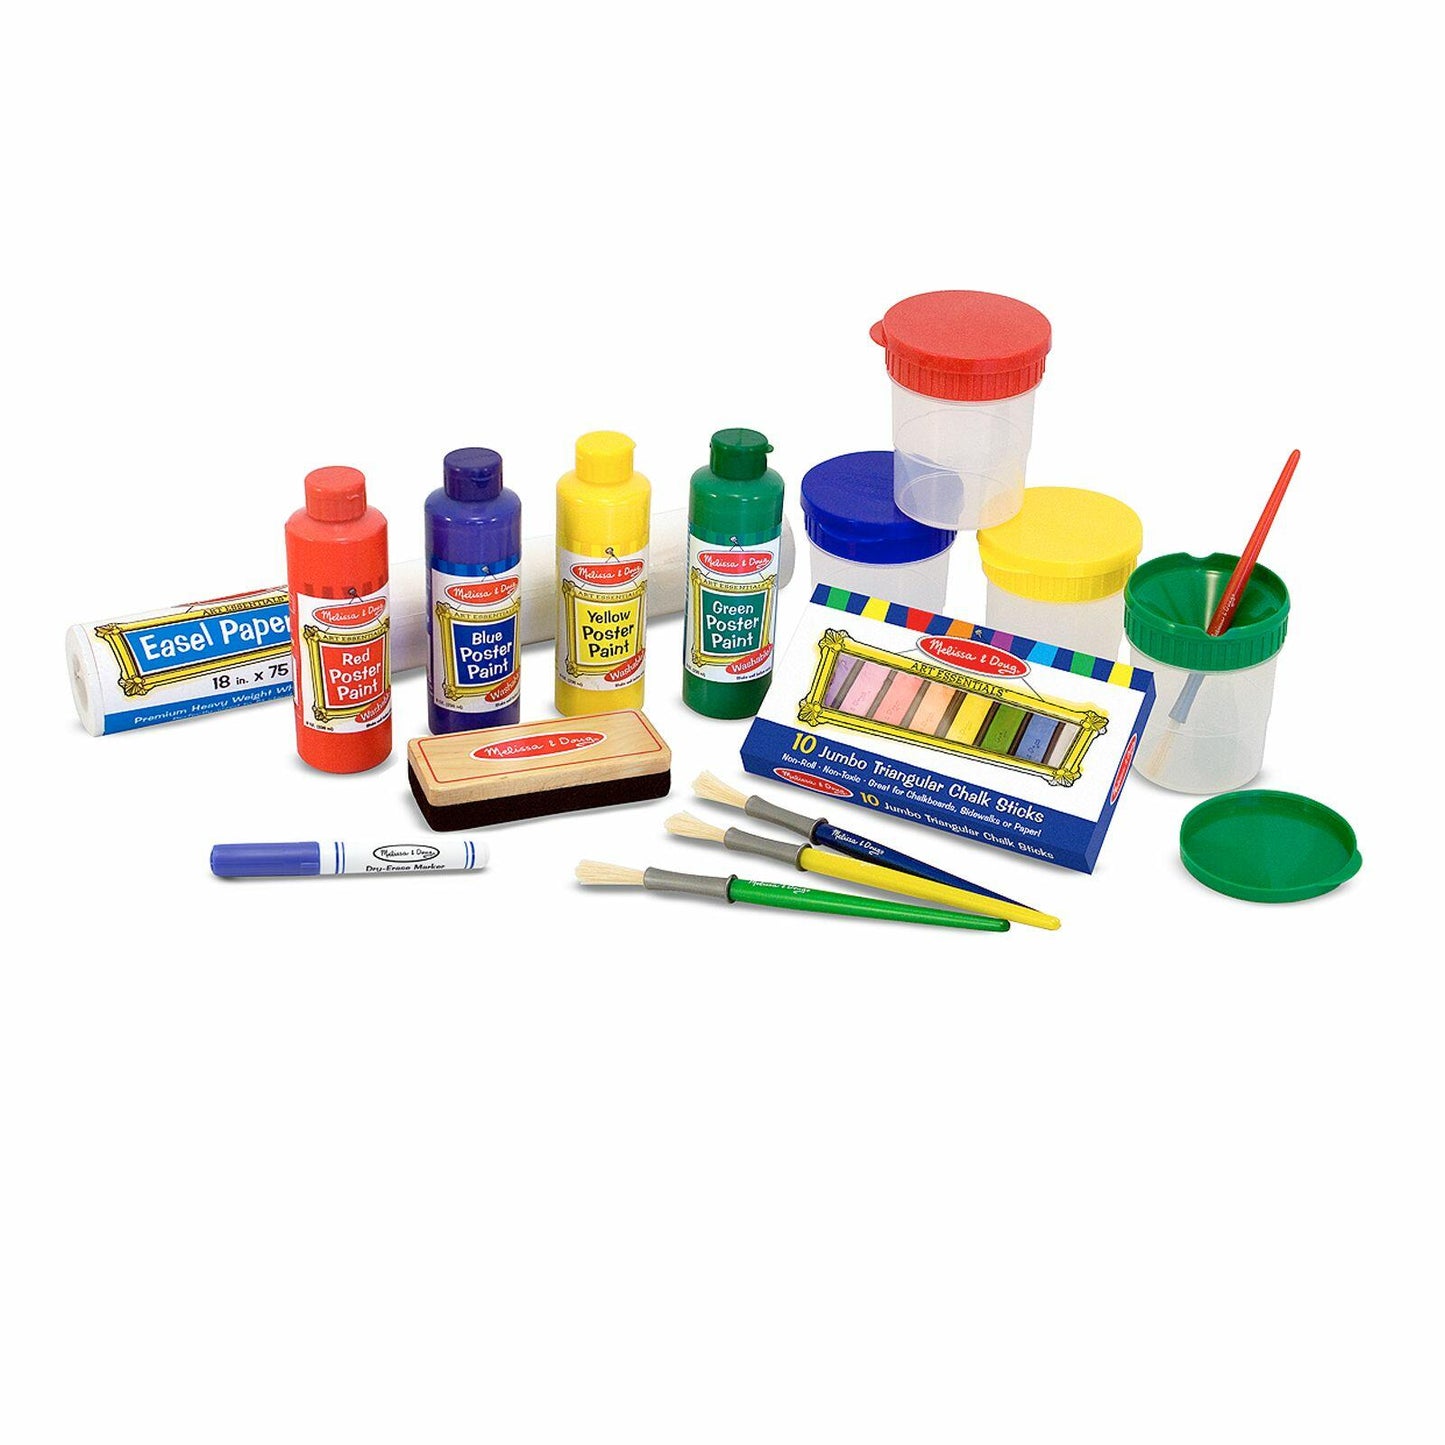 Melissa &amp; Doug Easel Accessory Set - Paint, Cups, Brushes, Chalk, Paper, Dry-Erase Marker